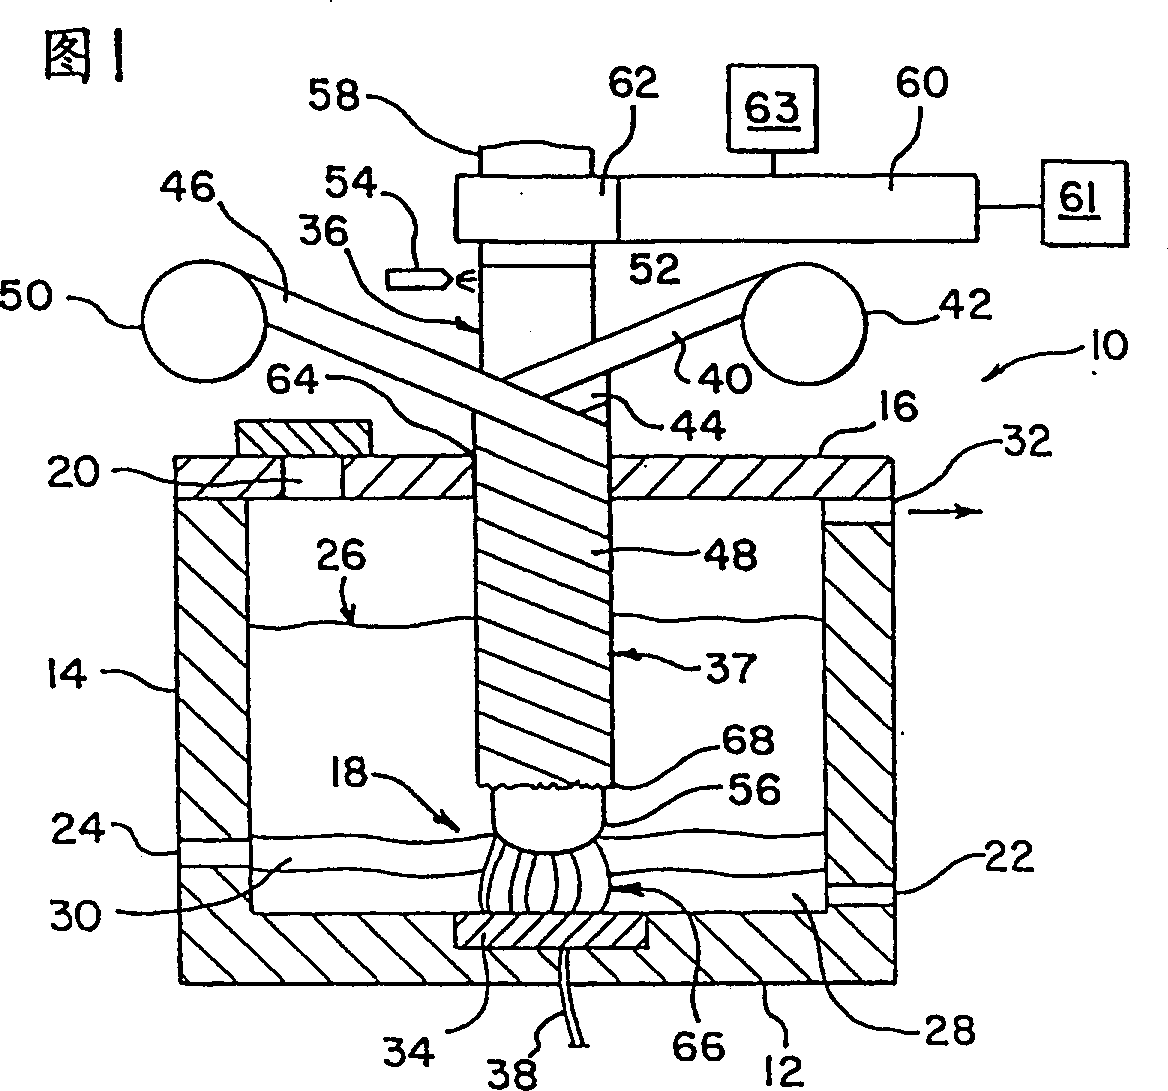 Electric fornace with insulated electrode and process for producing molten metals